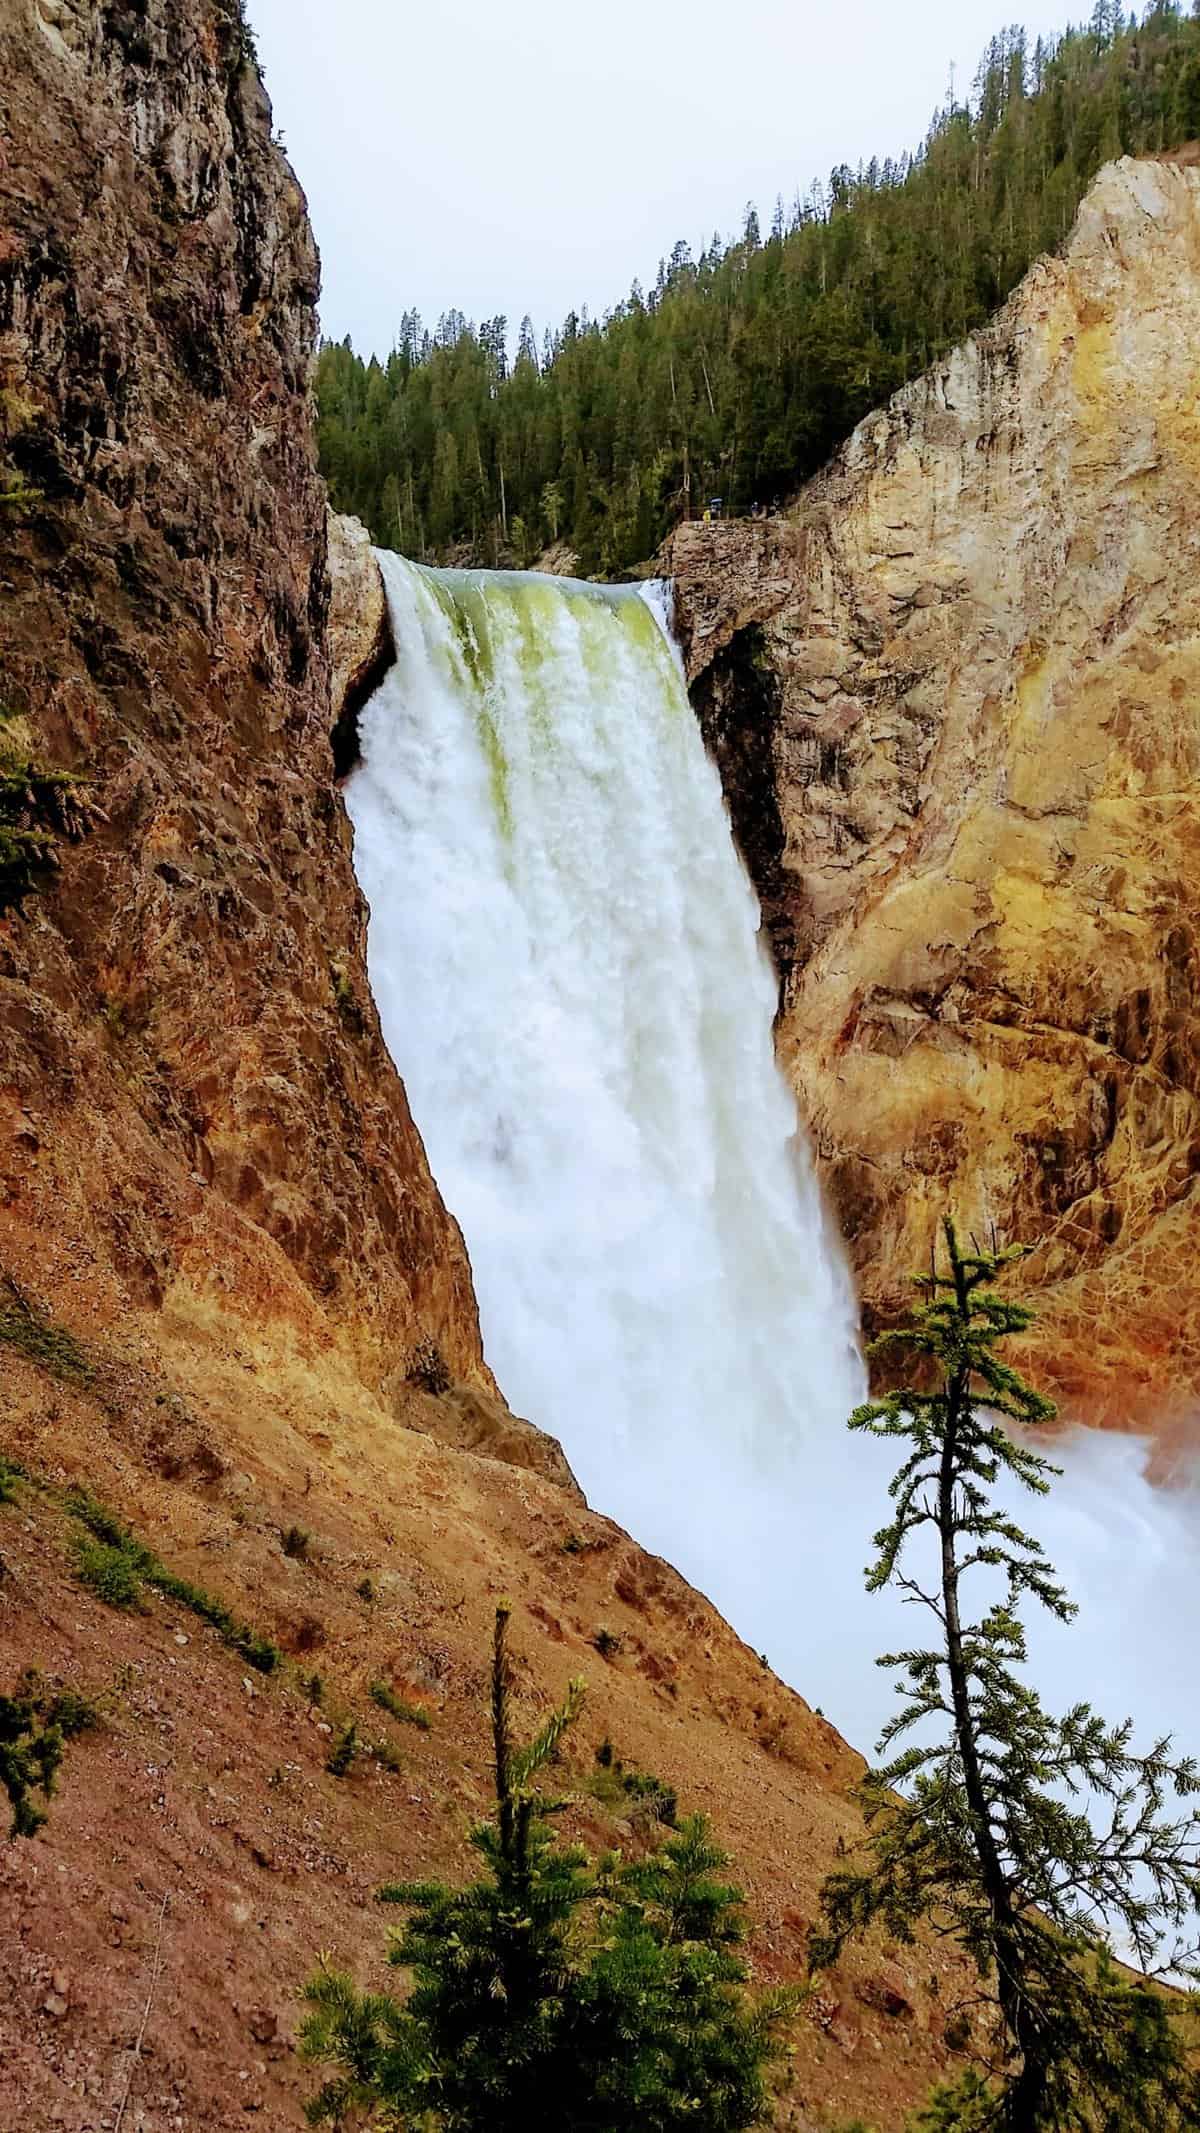 The Falls in Yellowstone National Park